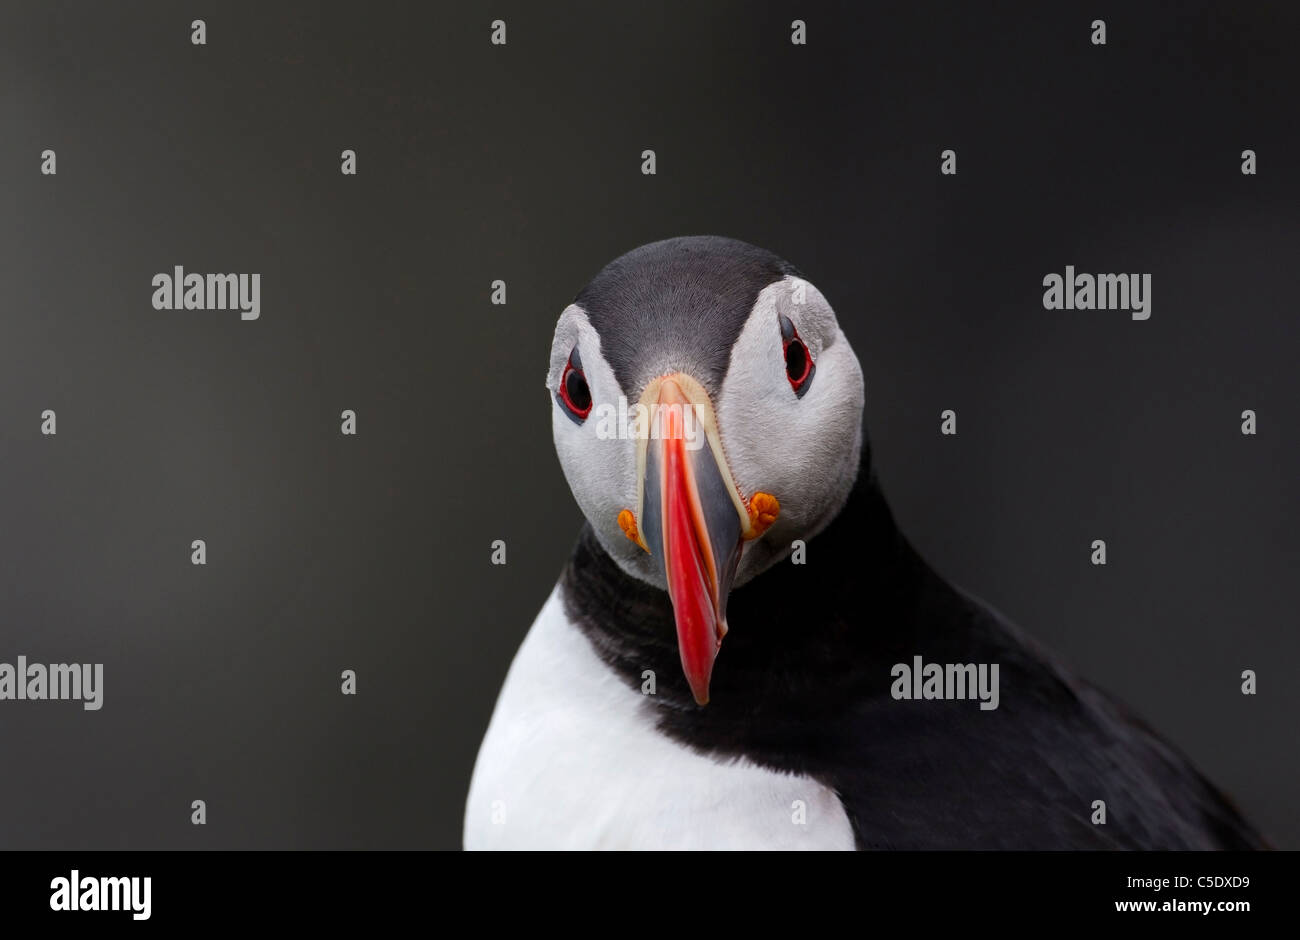 Extreme close-up of a puffin against blurred background Stock Photo